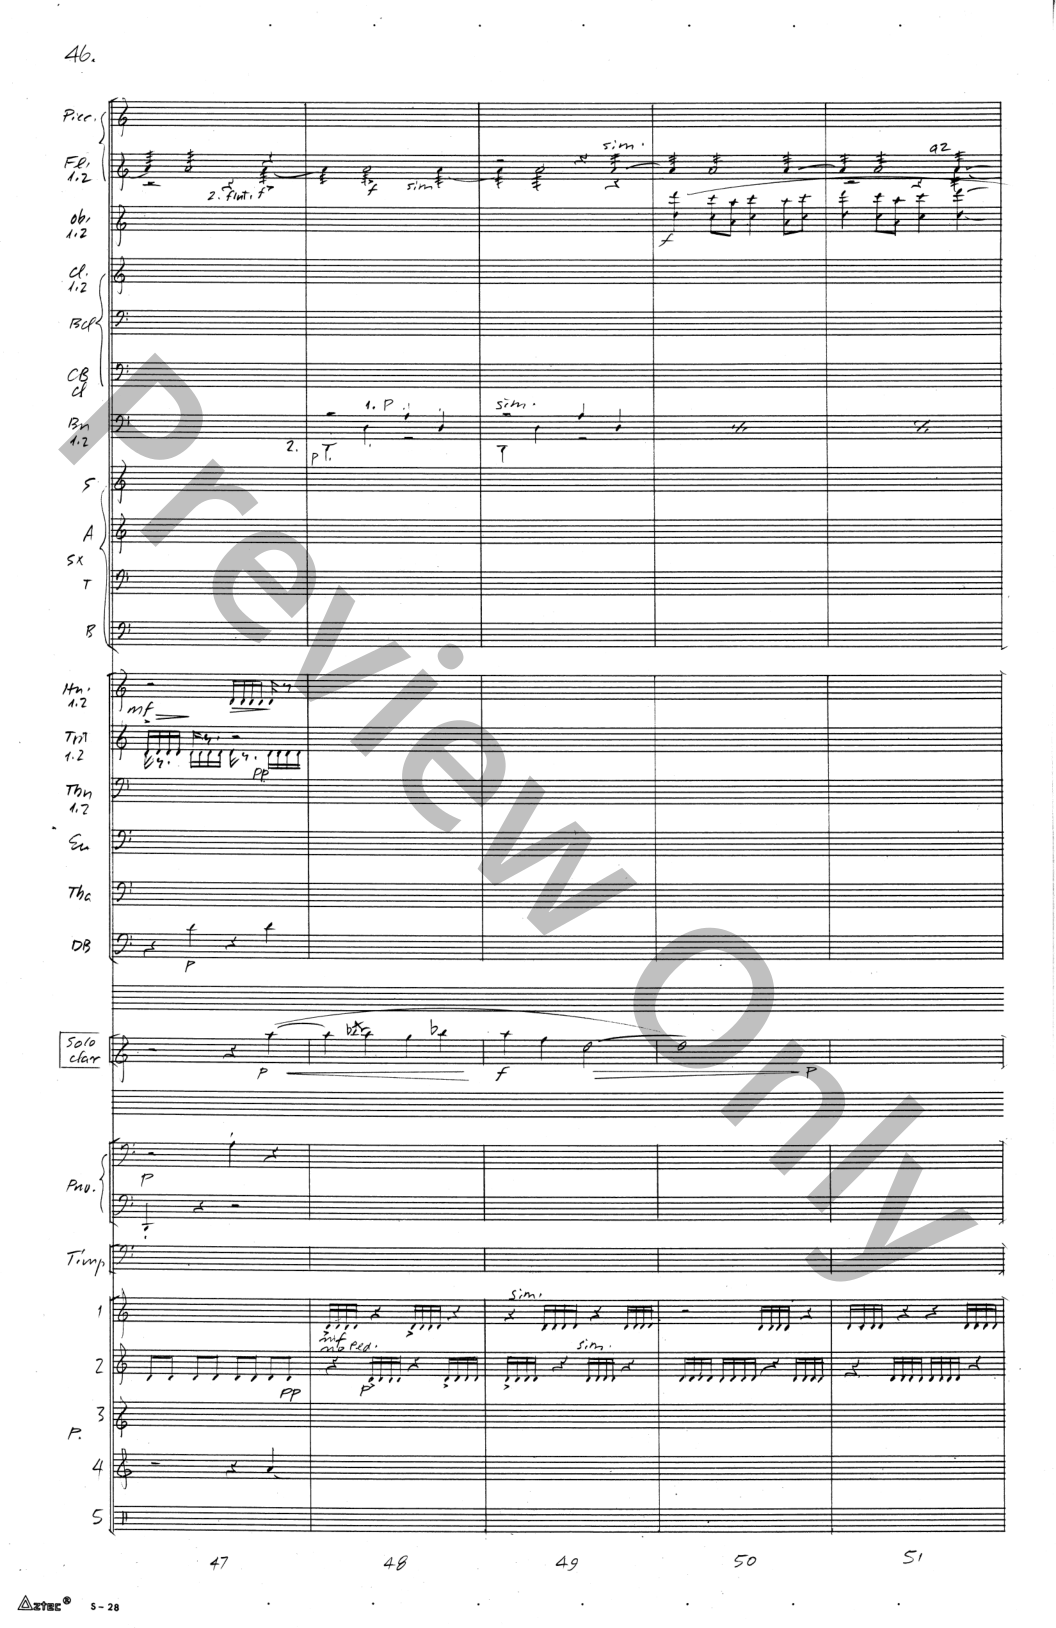 Concerto Clarinet and Wind Ensemble EPRINT